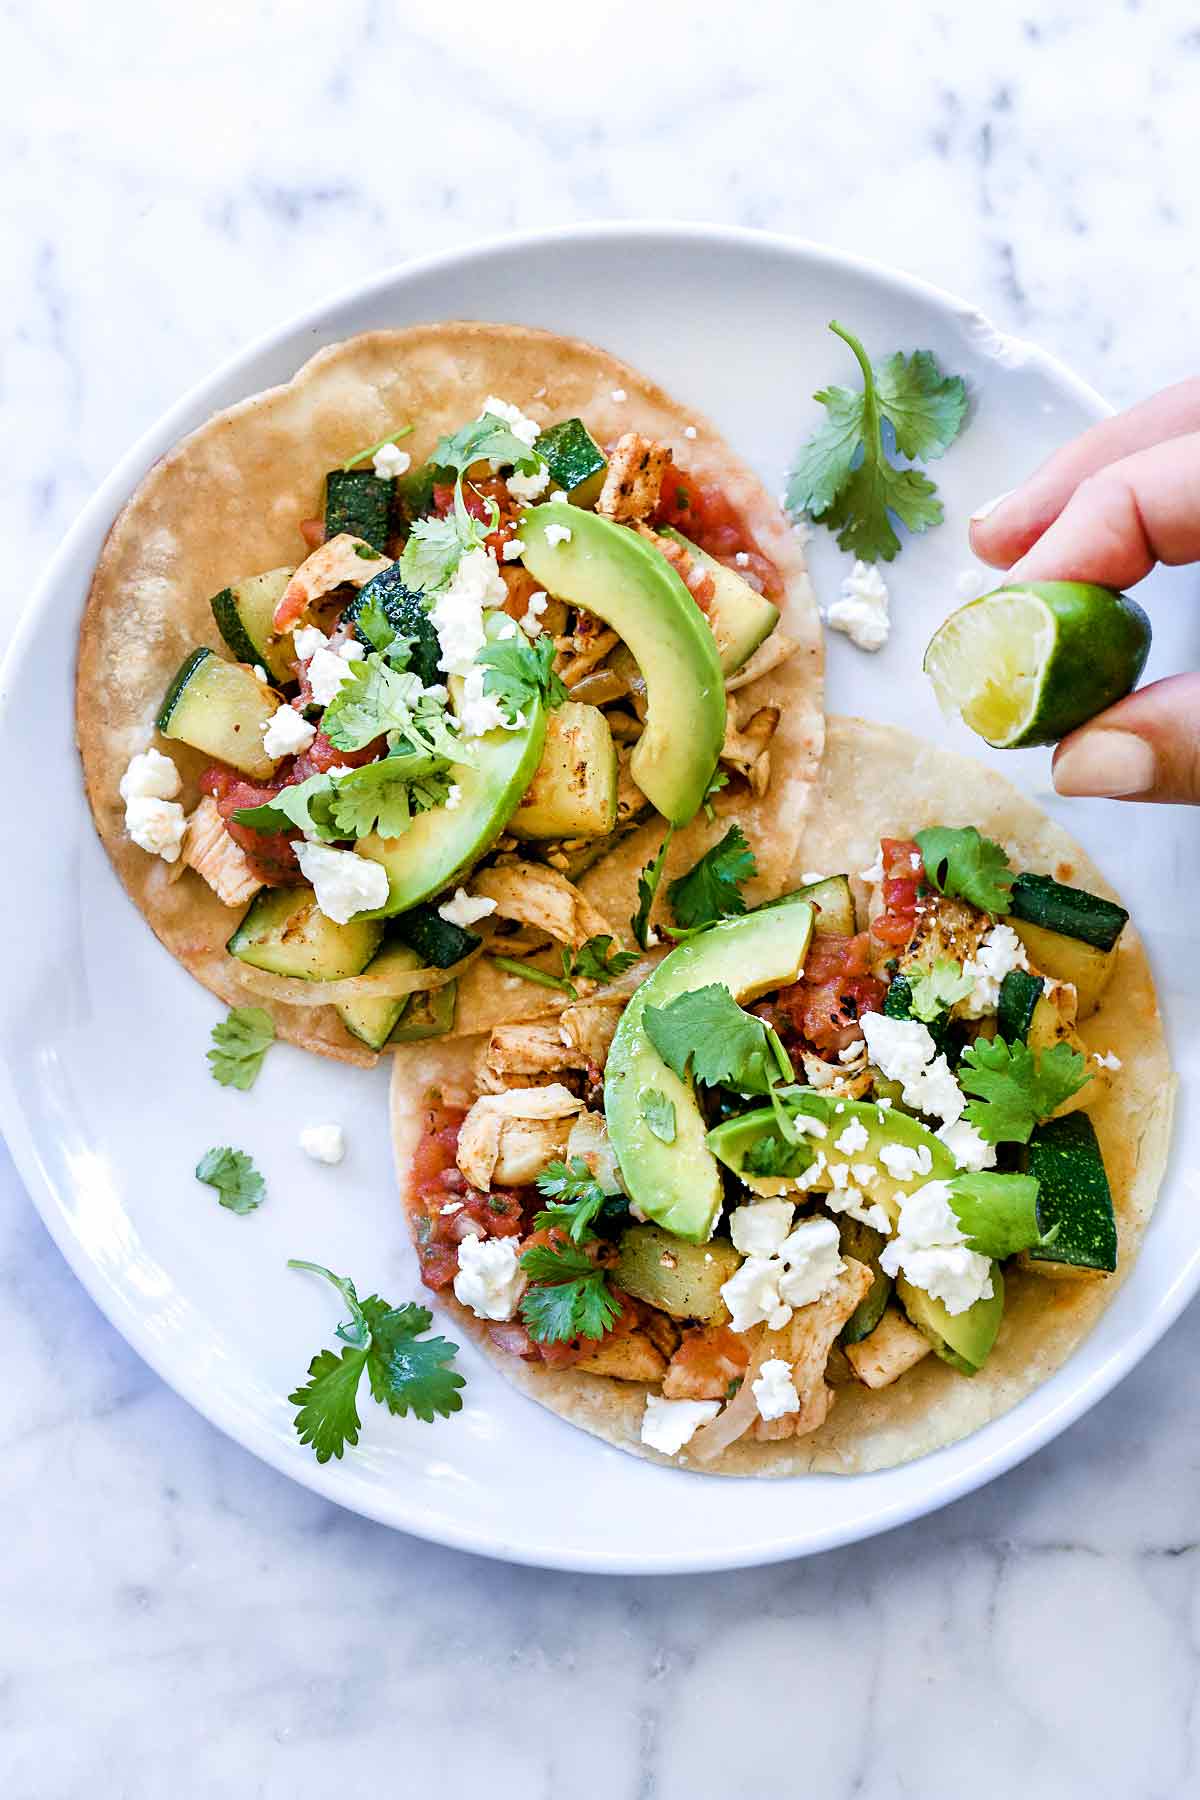 Easy Shredded Chicken and Zucchini Tacos from foodiecrush.com on foodiecrush.com